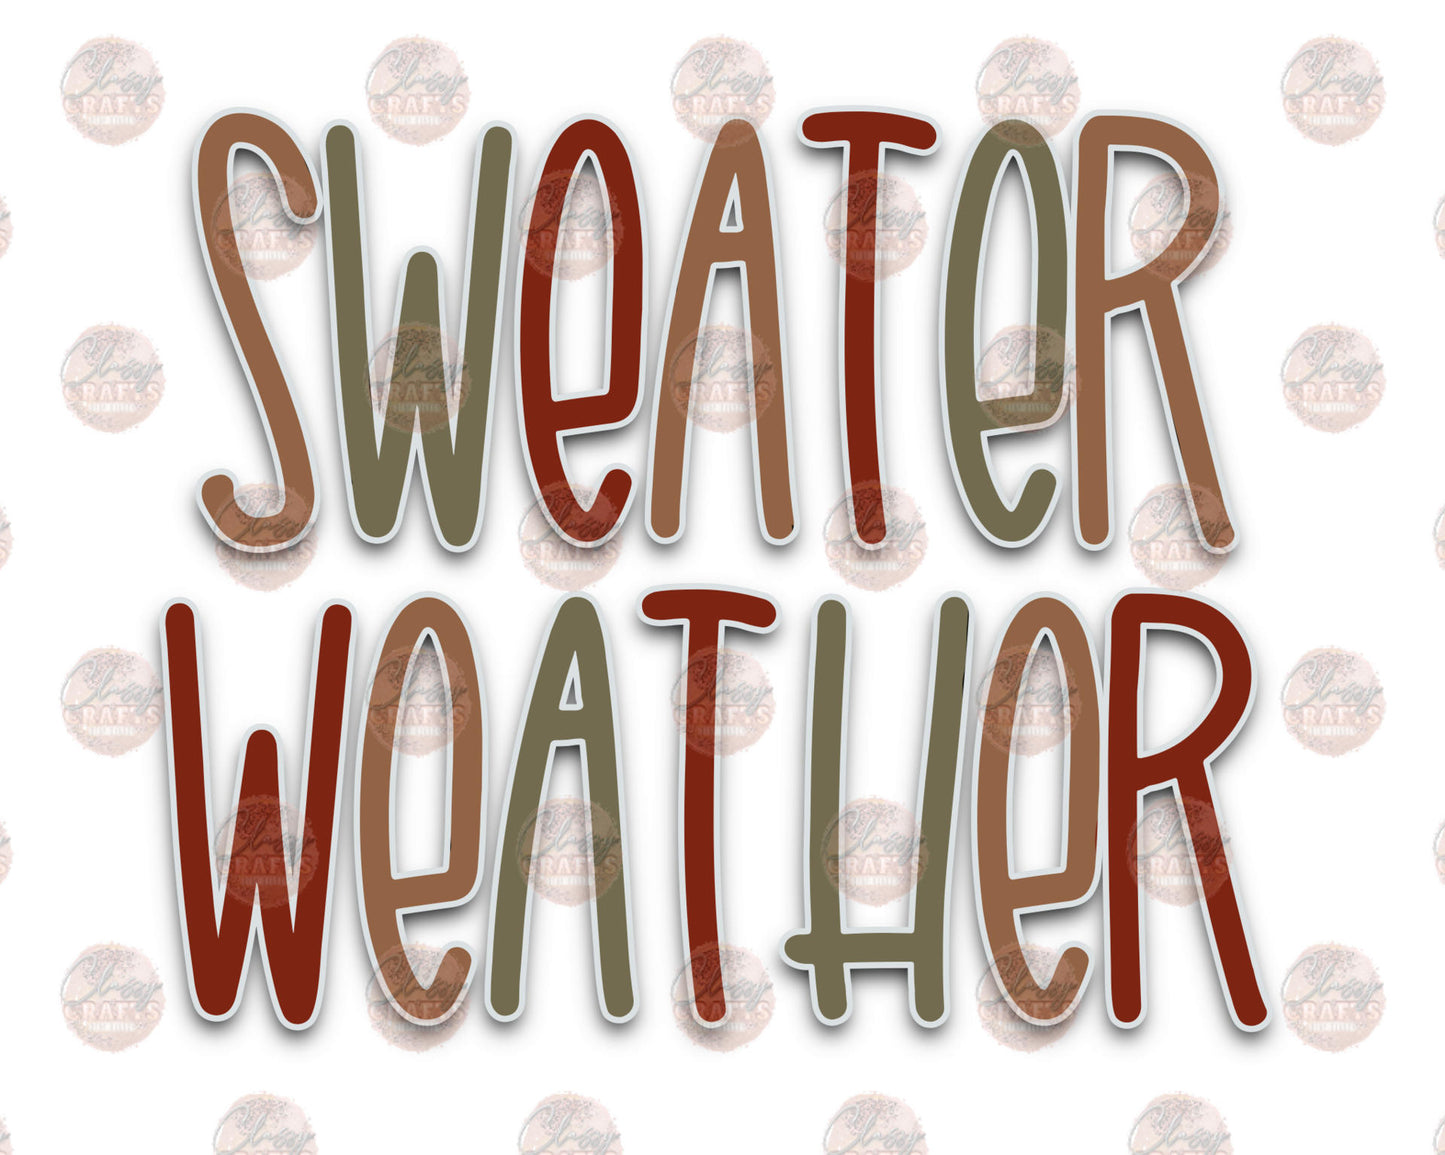 Sweater Weather - Sublimation Transfer